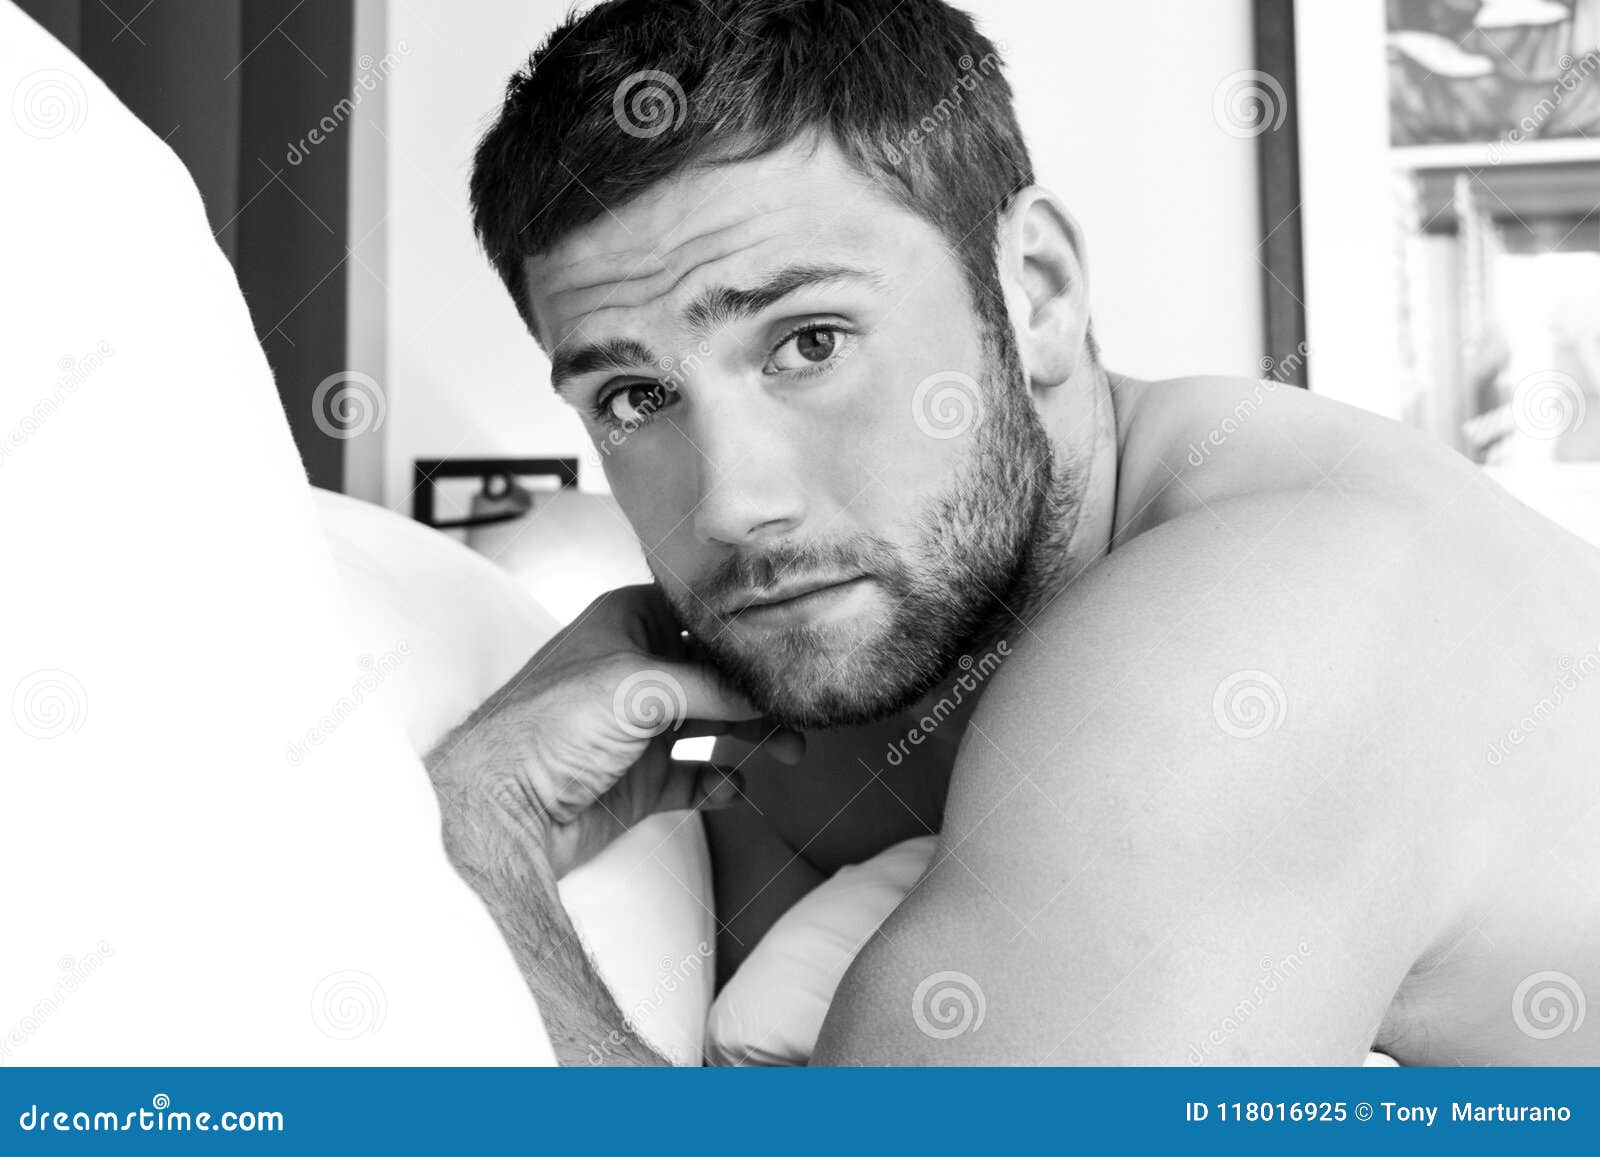 shirtless hunky man with beard lies naked in bed